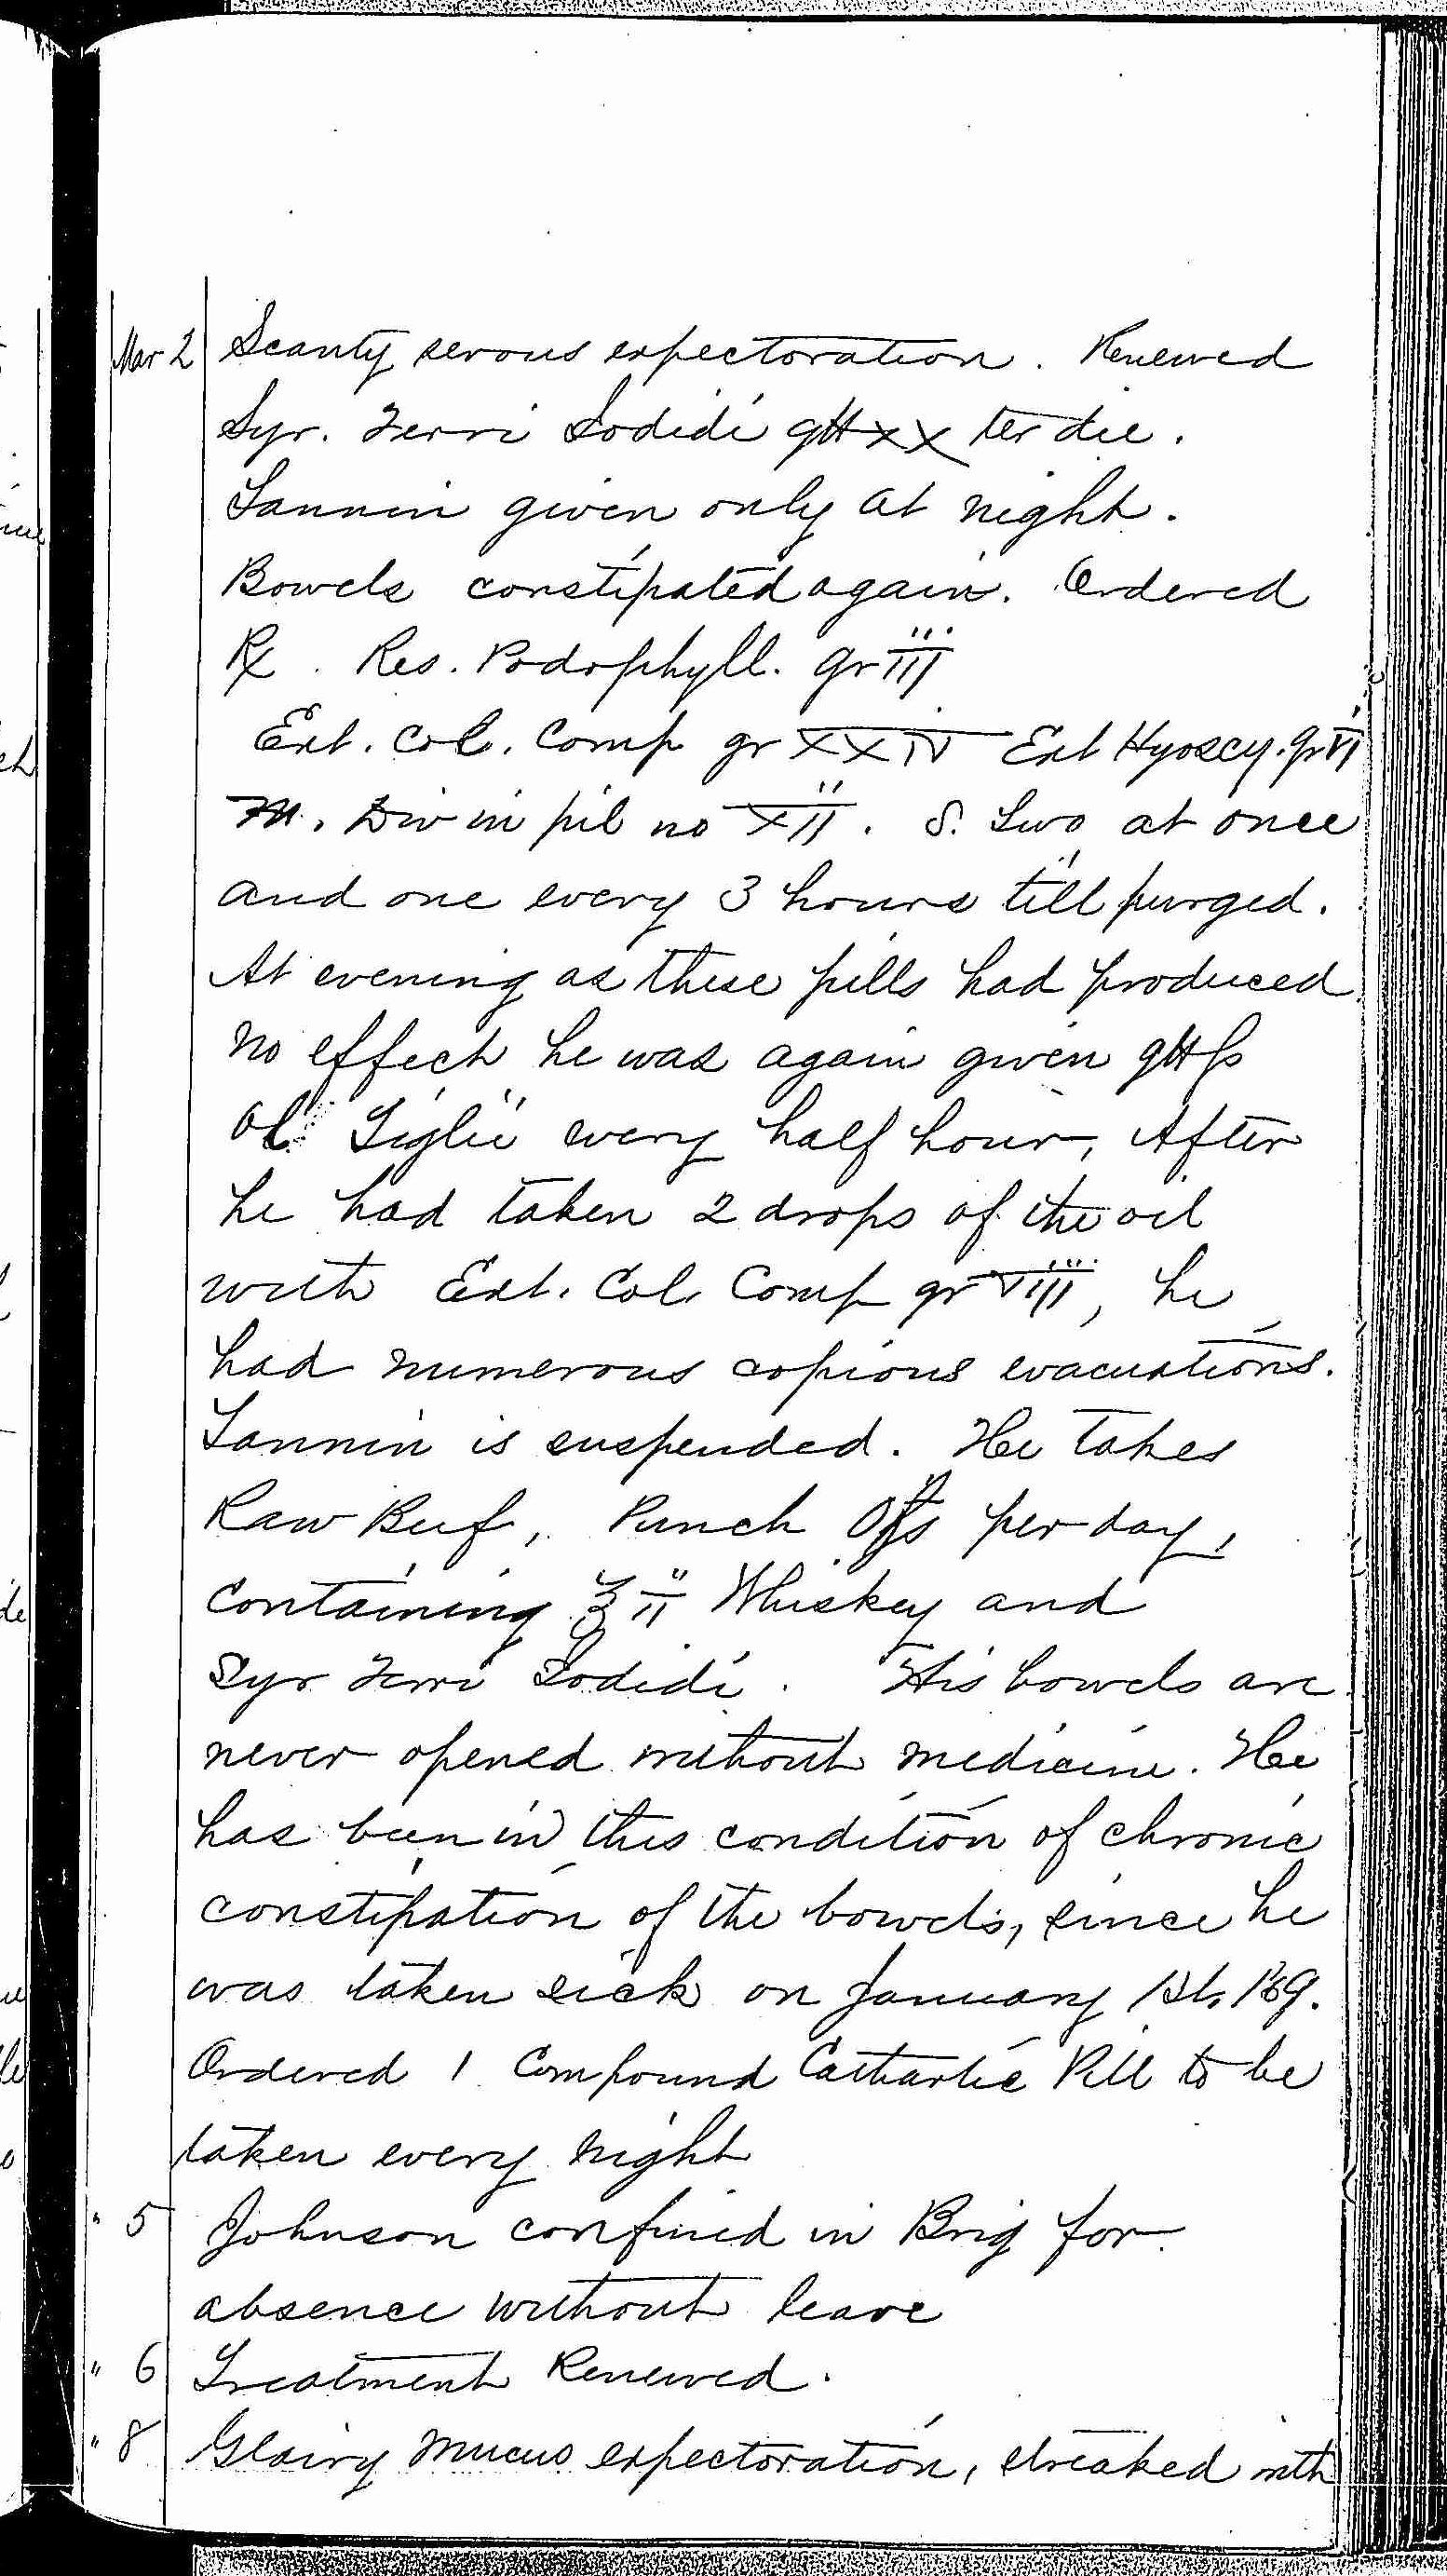 Entry for Charles Johnson (page 5 of 15) in the log Hospital Tickets and Case Papers - Naval Hospital - Washington, D.C. - 1868-69